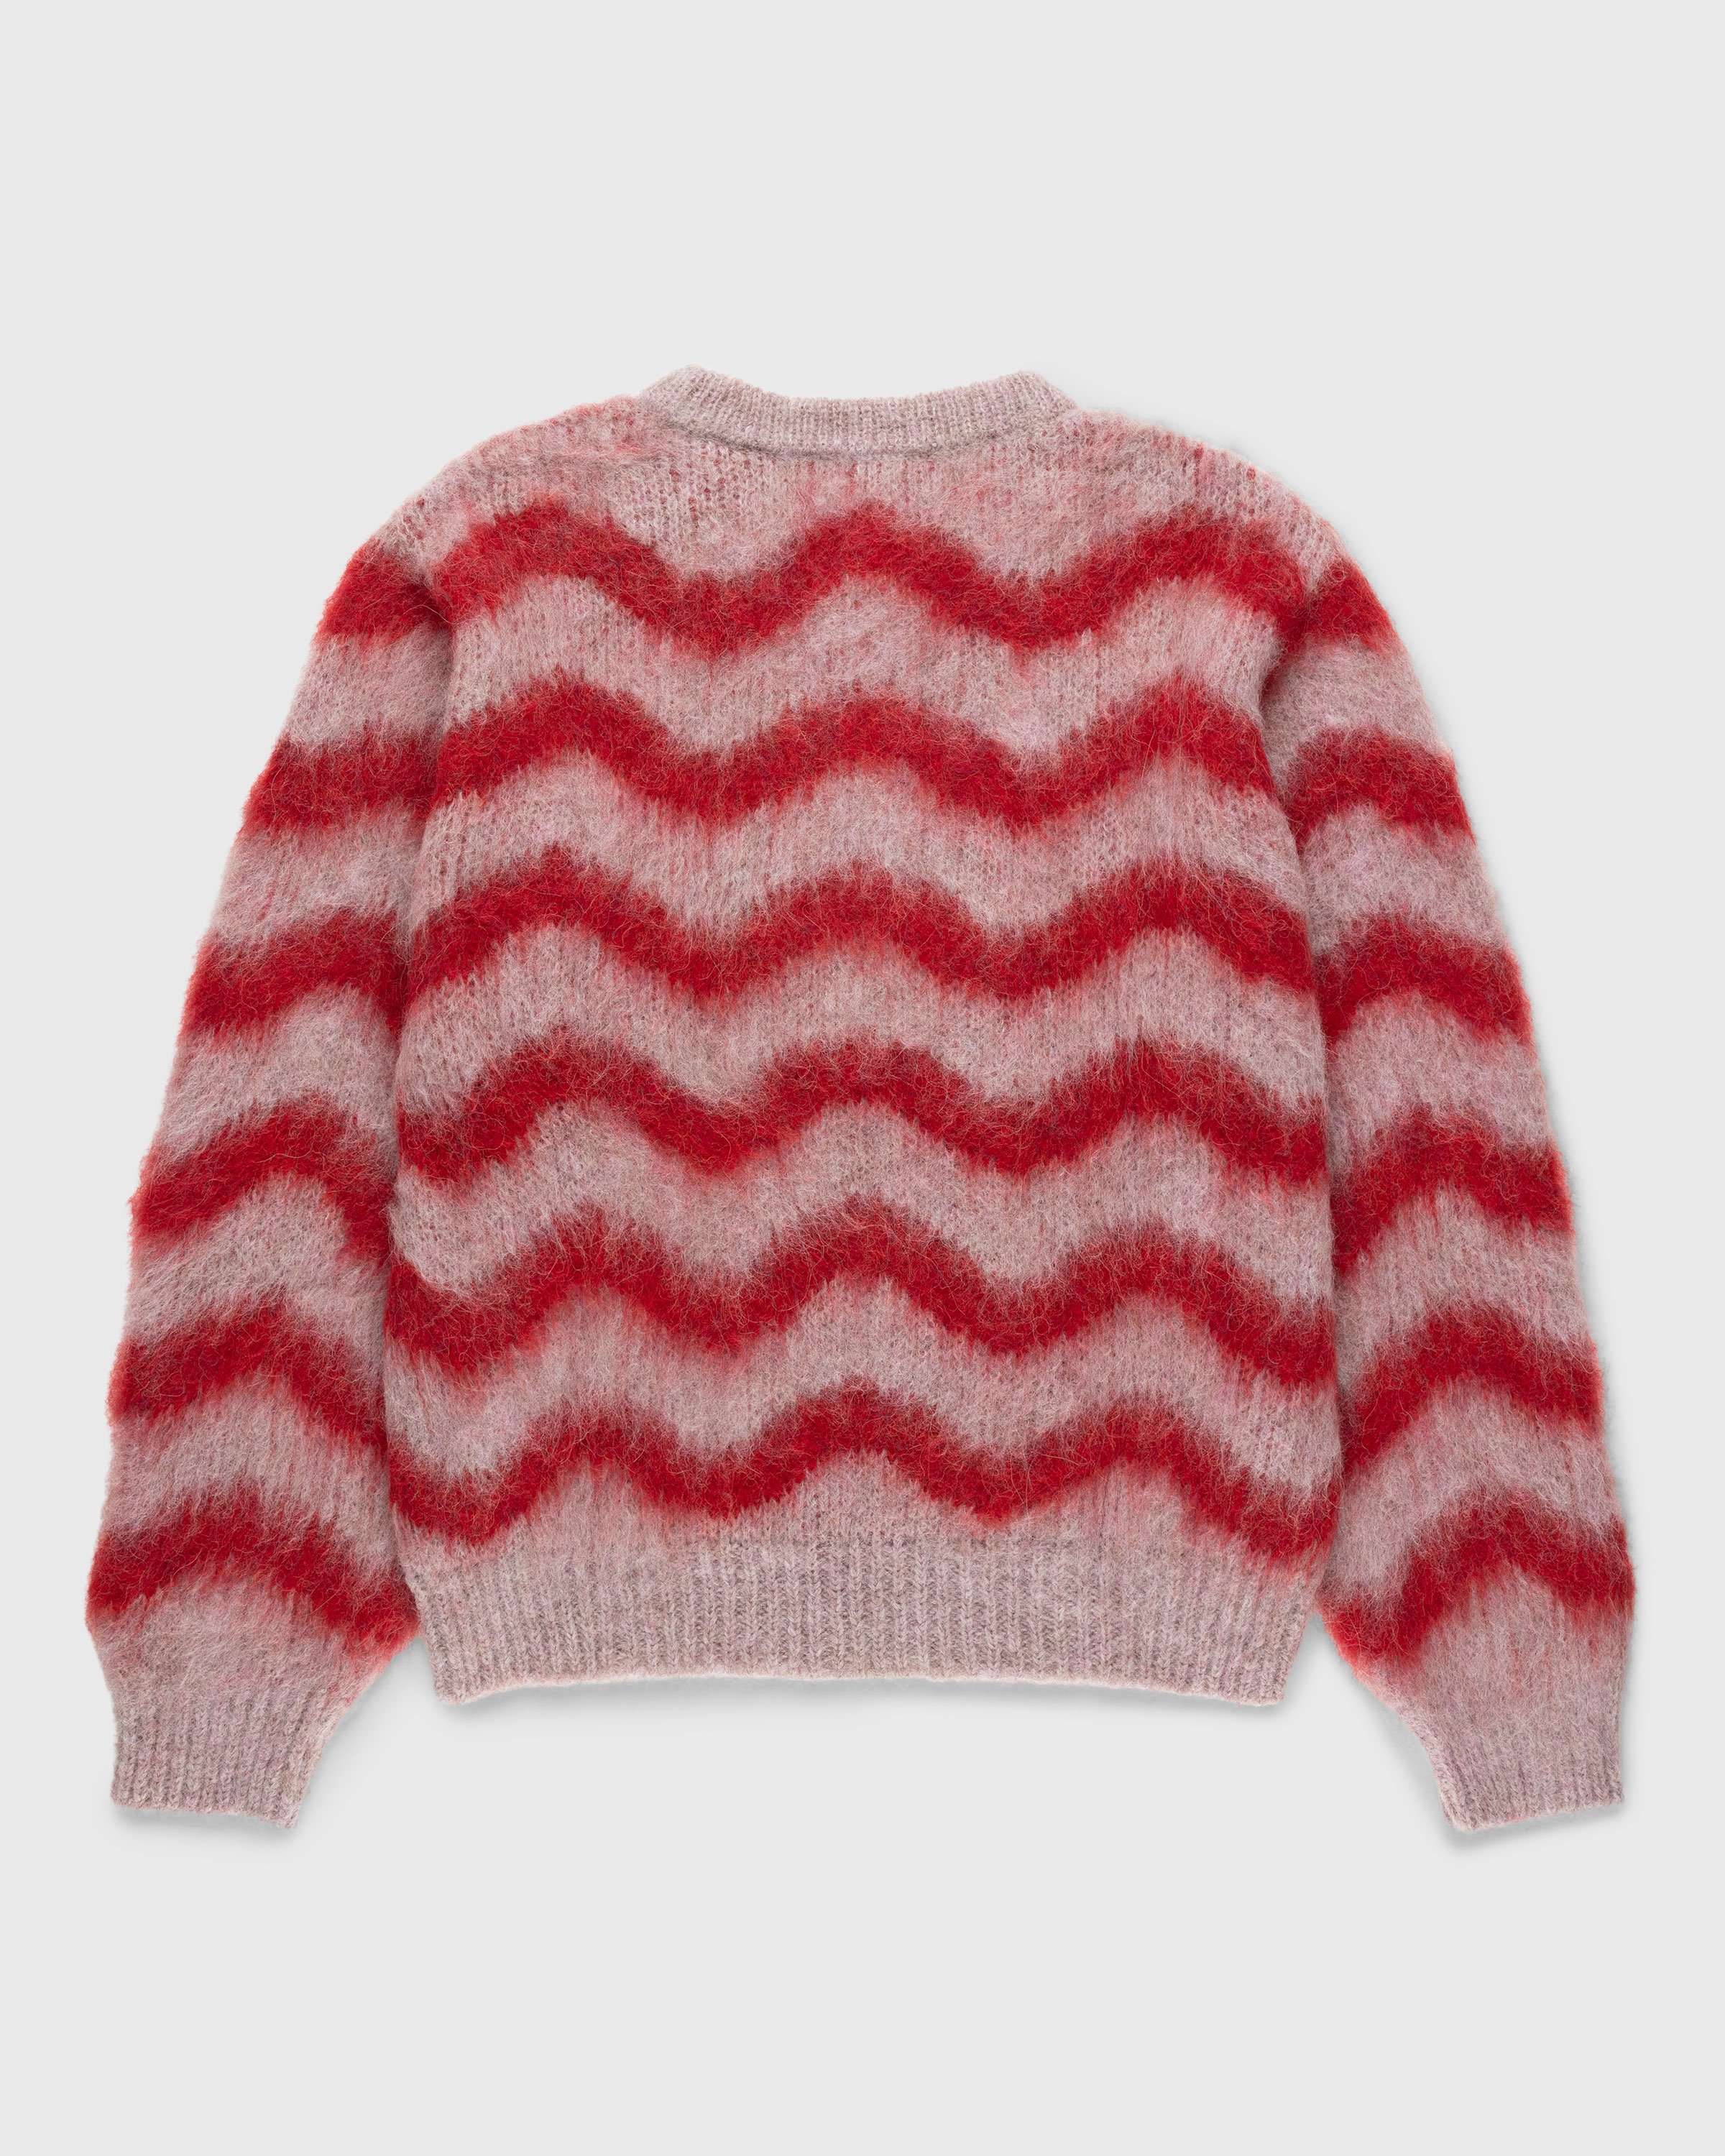 Highsnobiety HS05 - Alpaca Fuzzy Wave Sweater Pale Rose/Red - Clothing - Multi - Image 2